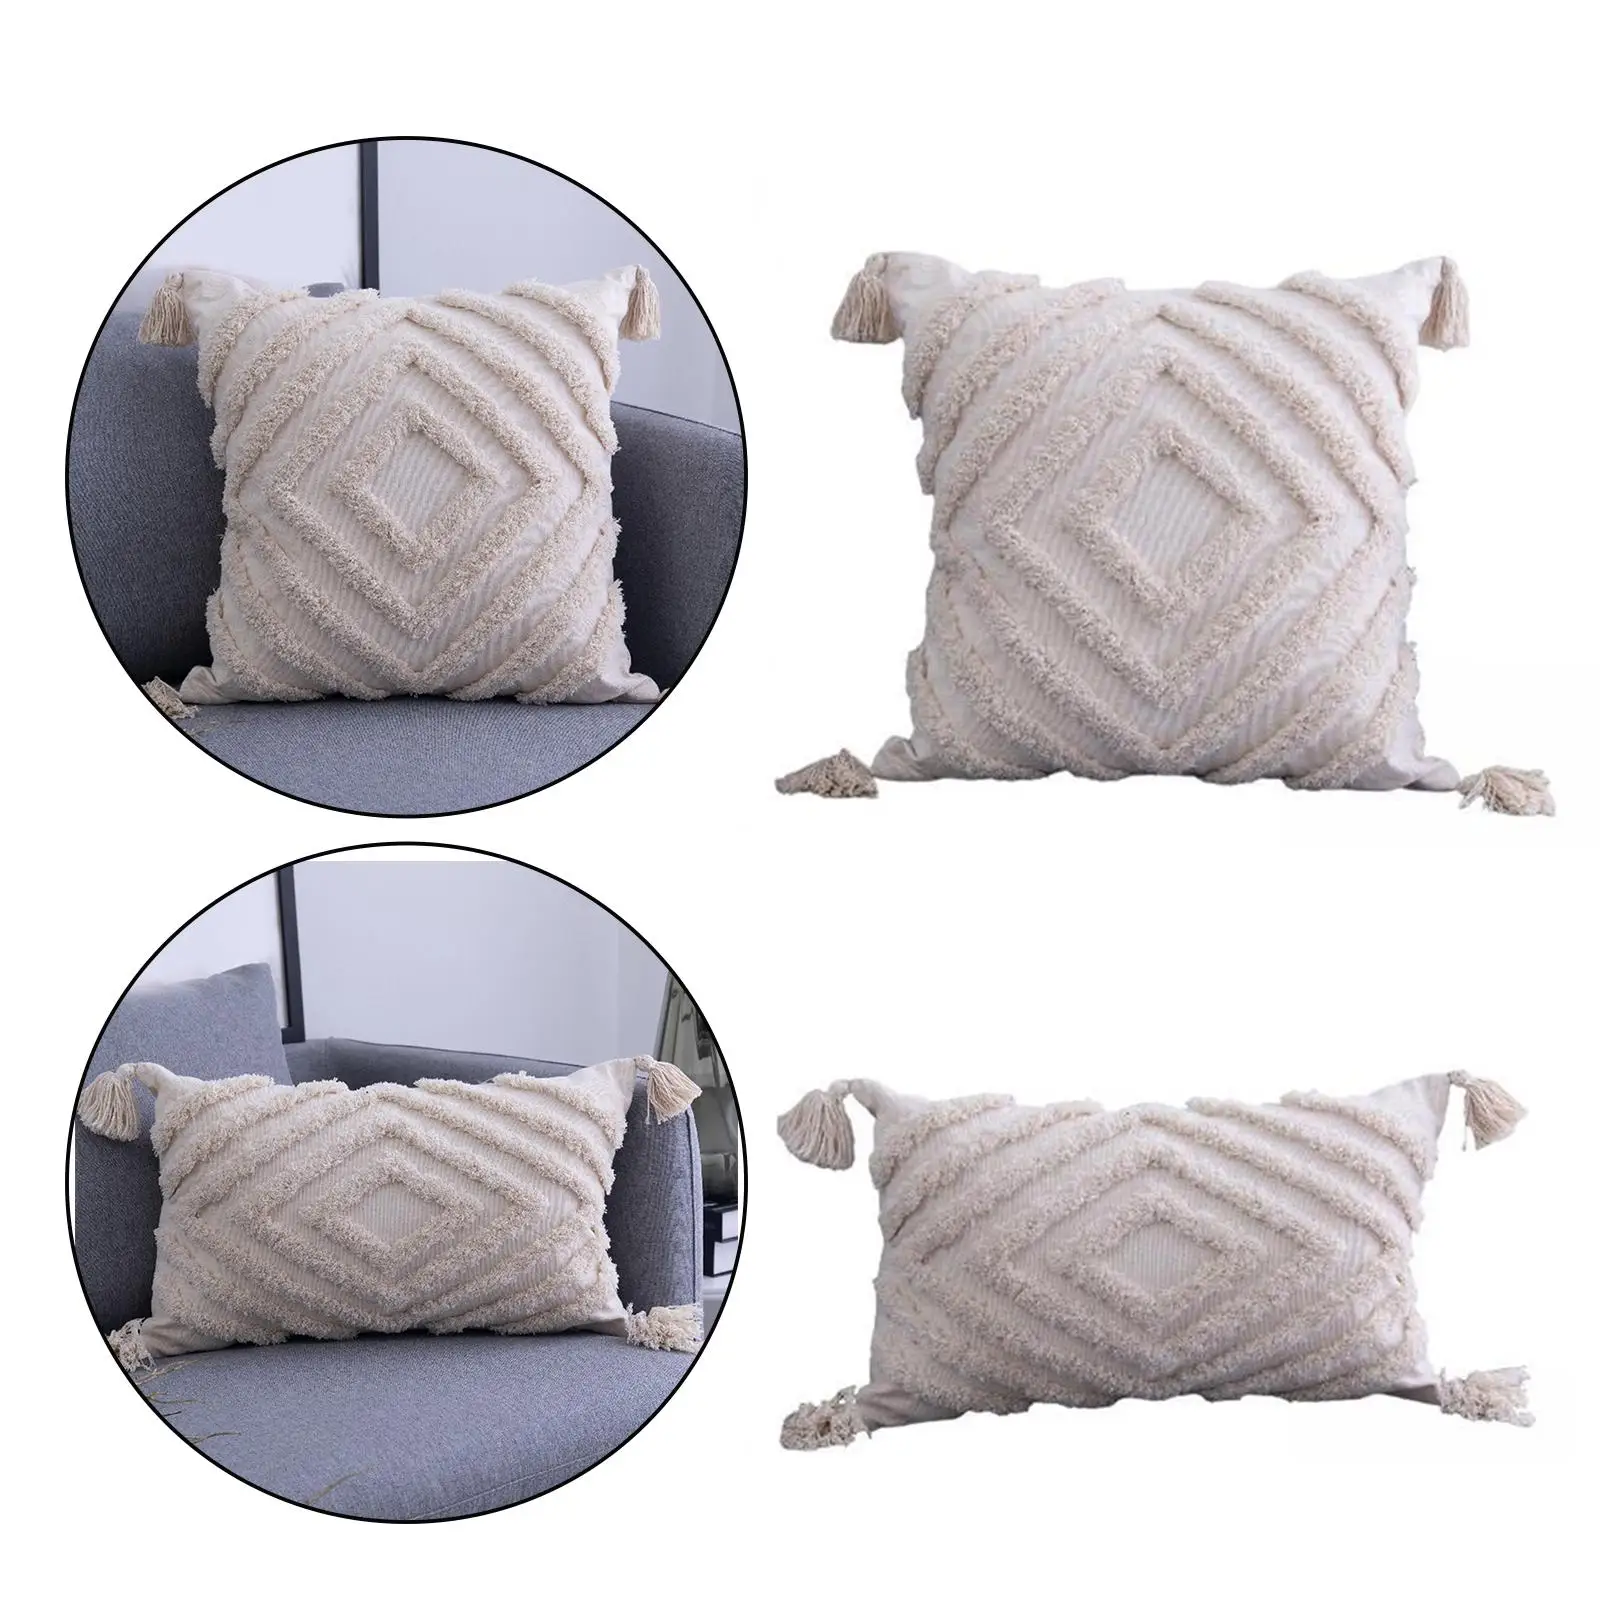 Loviver 2x Throw Pillow Cover Tassels Woven Tufted Cushion Cover for Bed